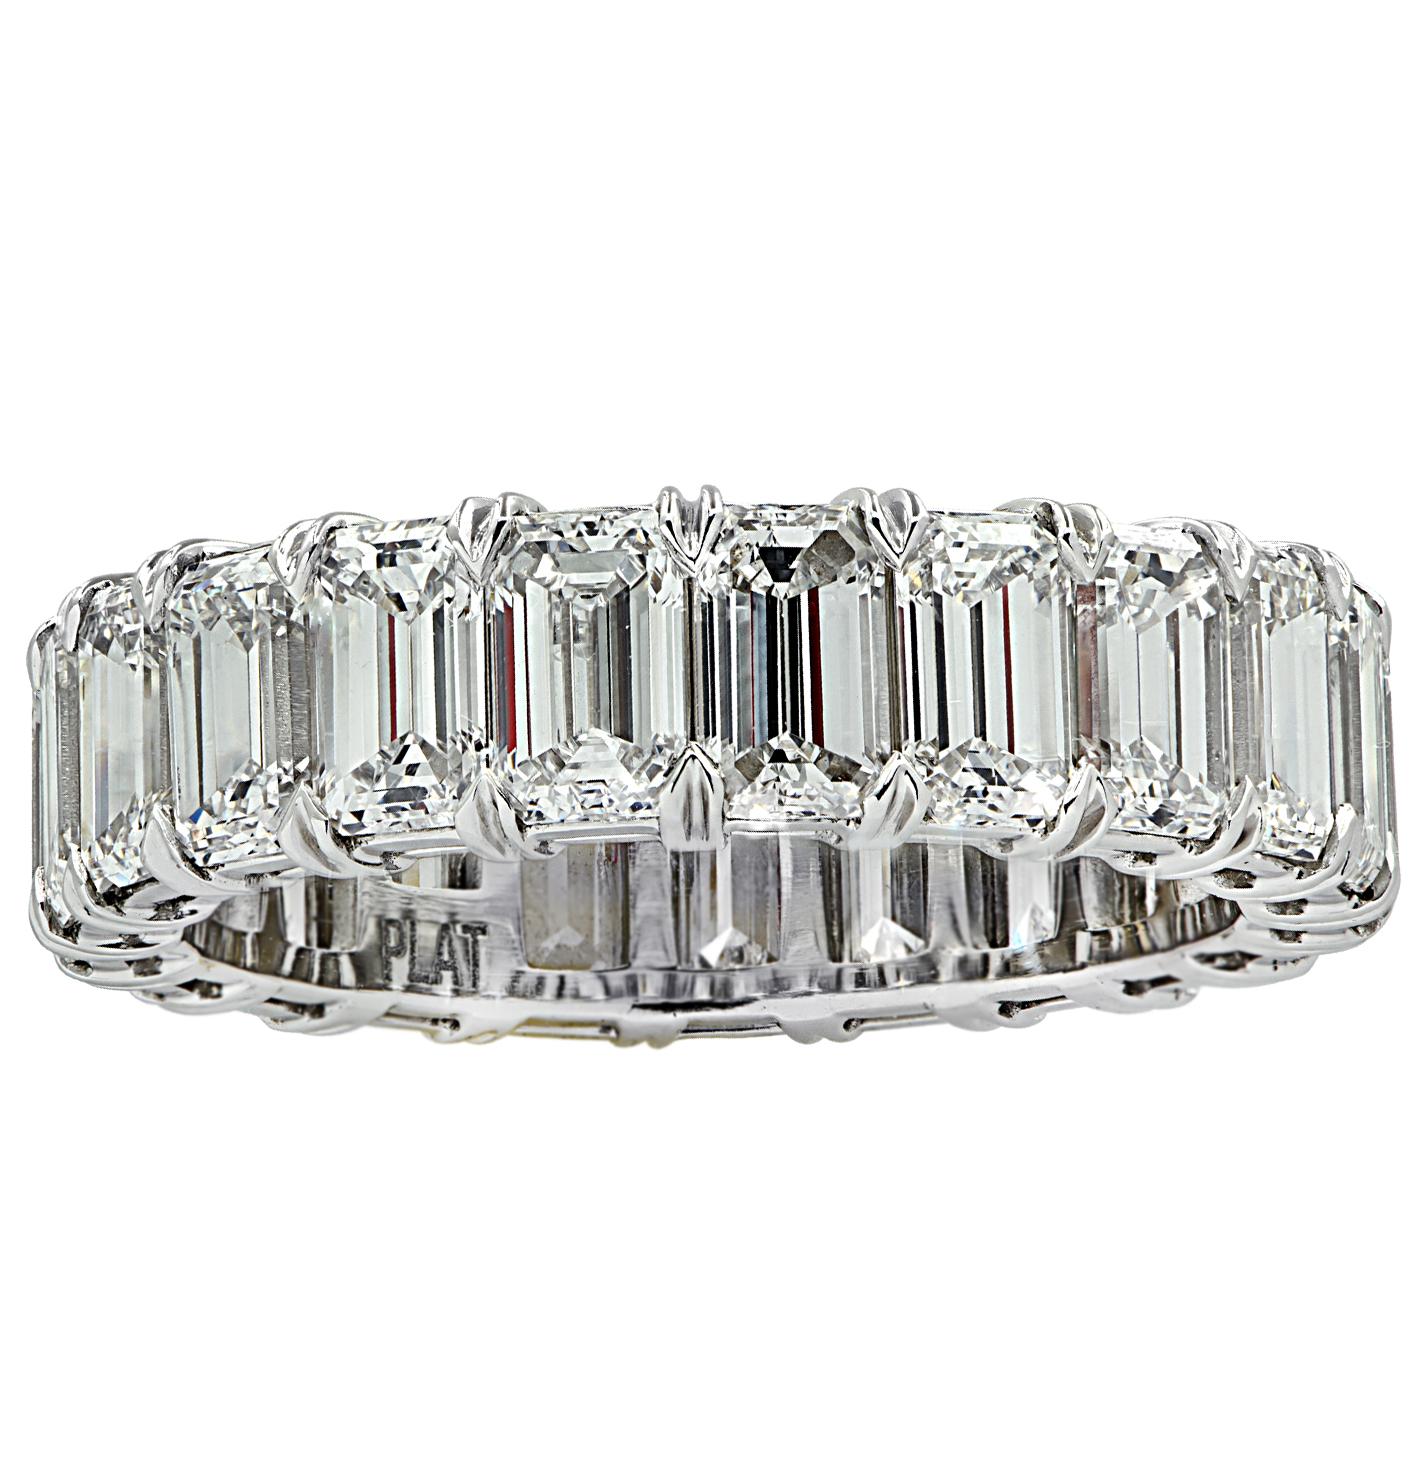 Exquisite Vivid Diamonds eternity band crafted in Platinum, showcasing 19 stunning GIA Certified emerald cut diamonds weighing 6.62 carats total, D-F color, VS clarity. Each diamond was carefully selected, perfectly matched and set in a seamless sea